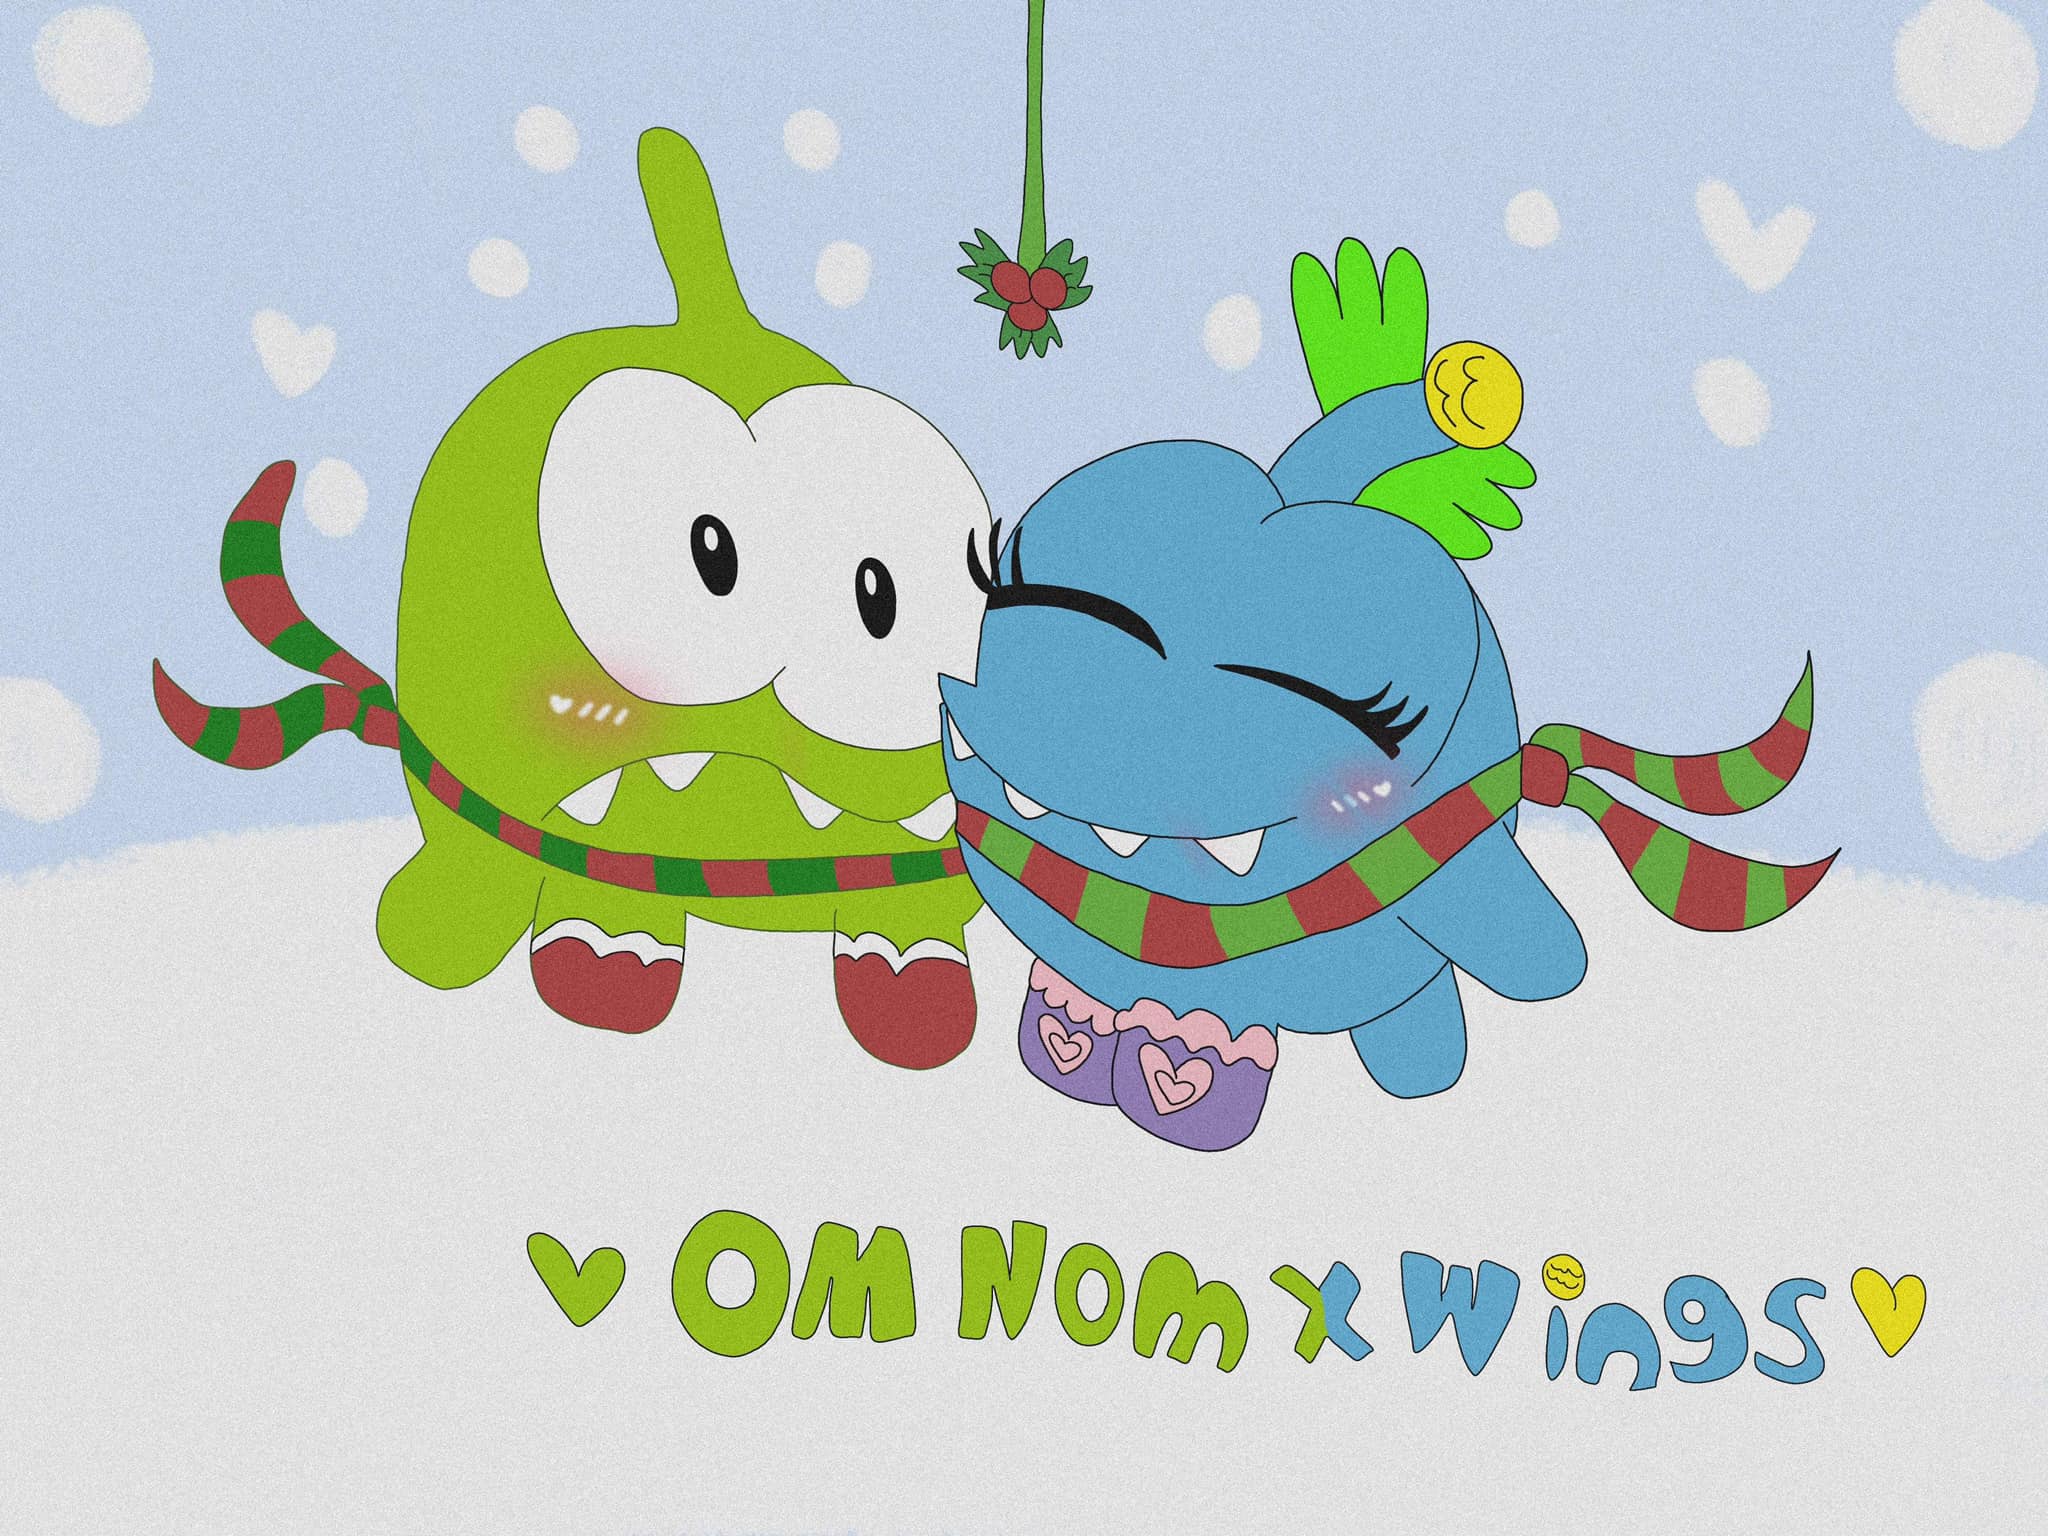 Cut the rope magic christmas icon by DavePark1999 on DeviantArt